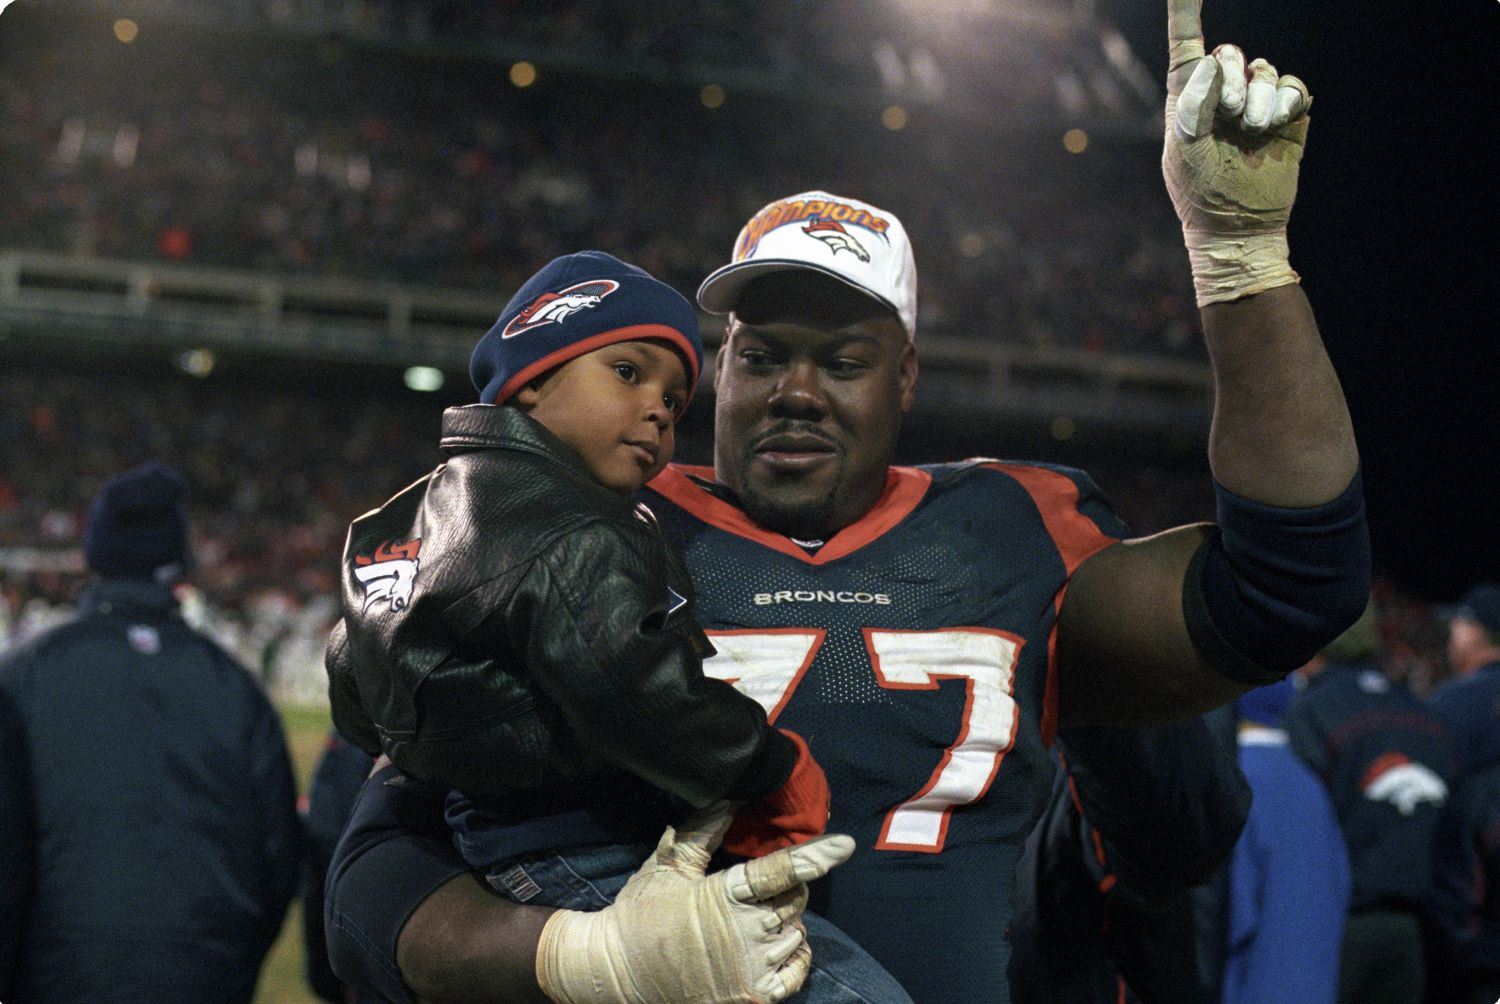 John Elway and the Denver Broncos suffered a tragic loss on Friday with the unexpected death of former offensive tackle Tony Jones.